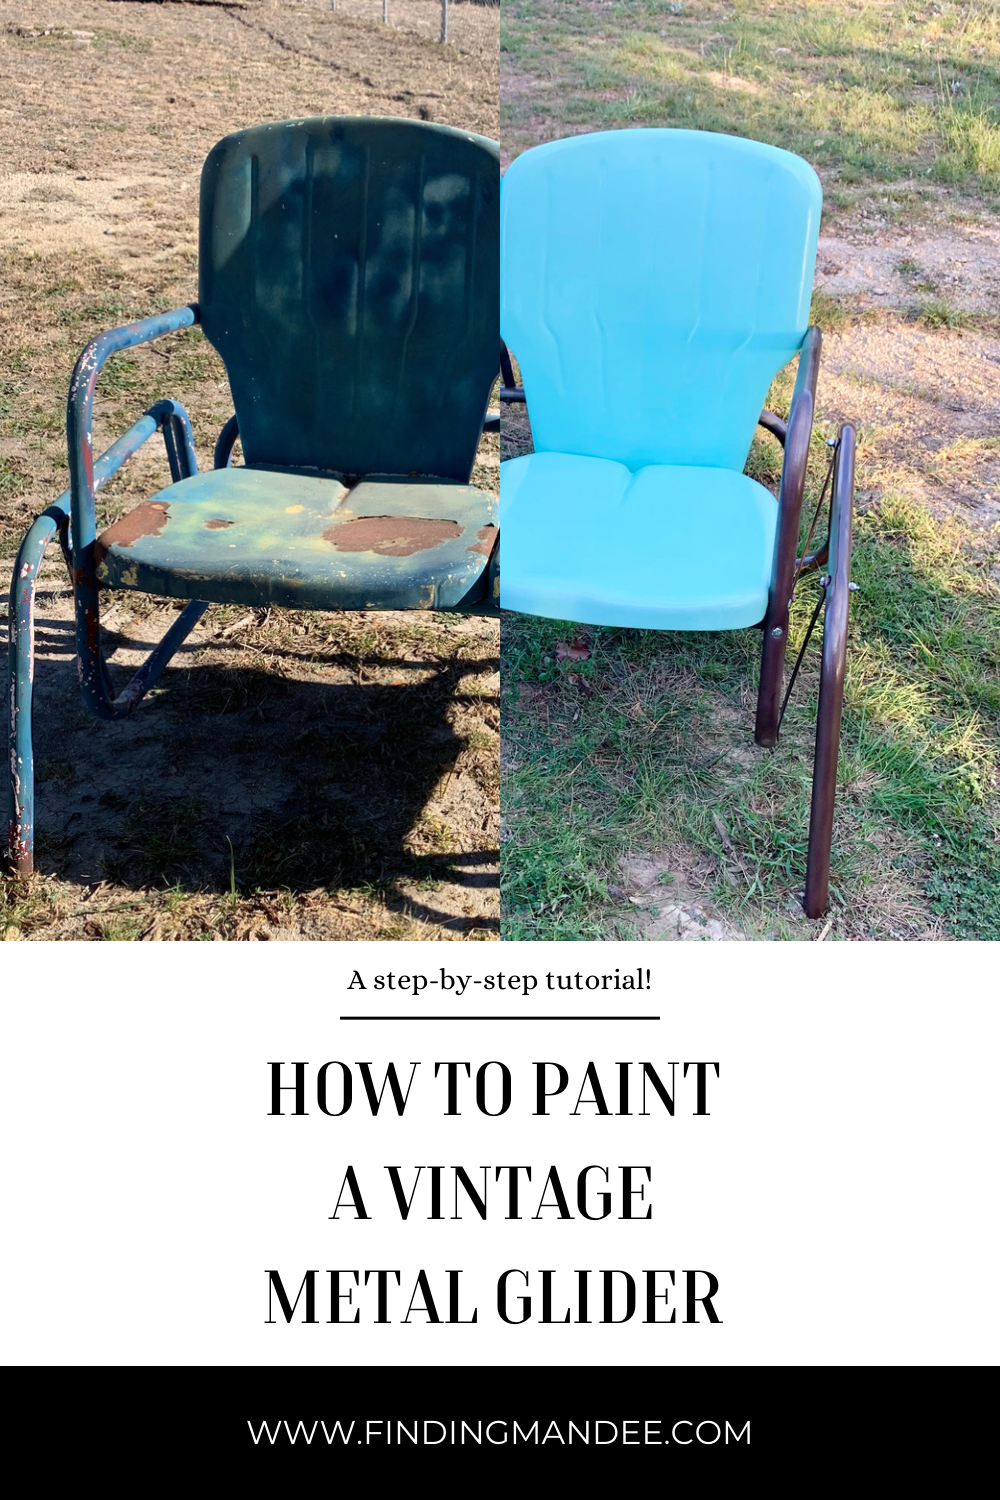 How to paint a Vintage Metal Glider: A Step-By-Step Tutorial | Finding Mandee